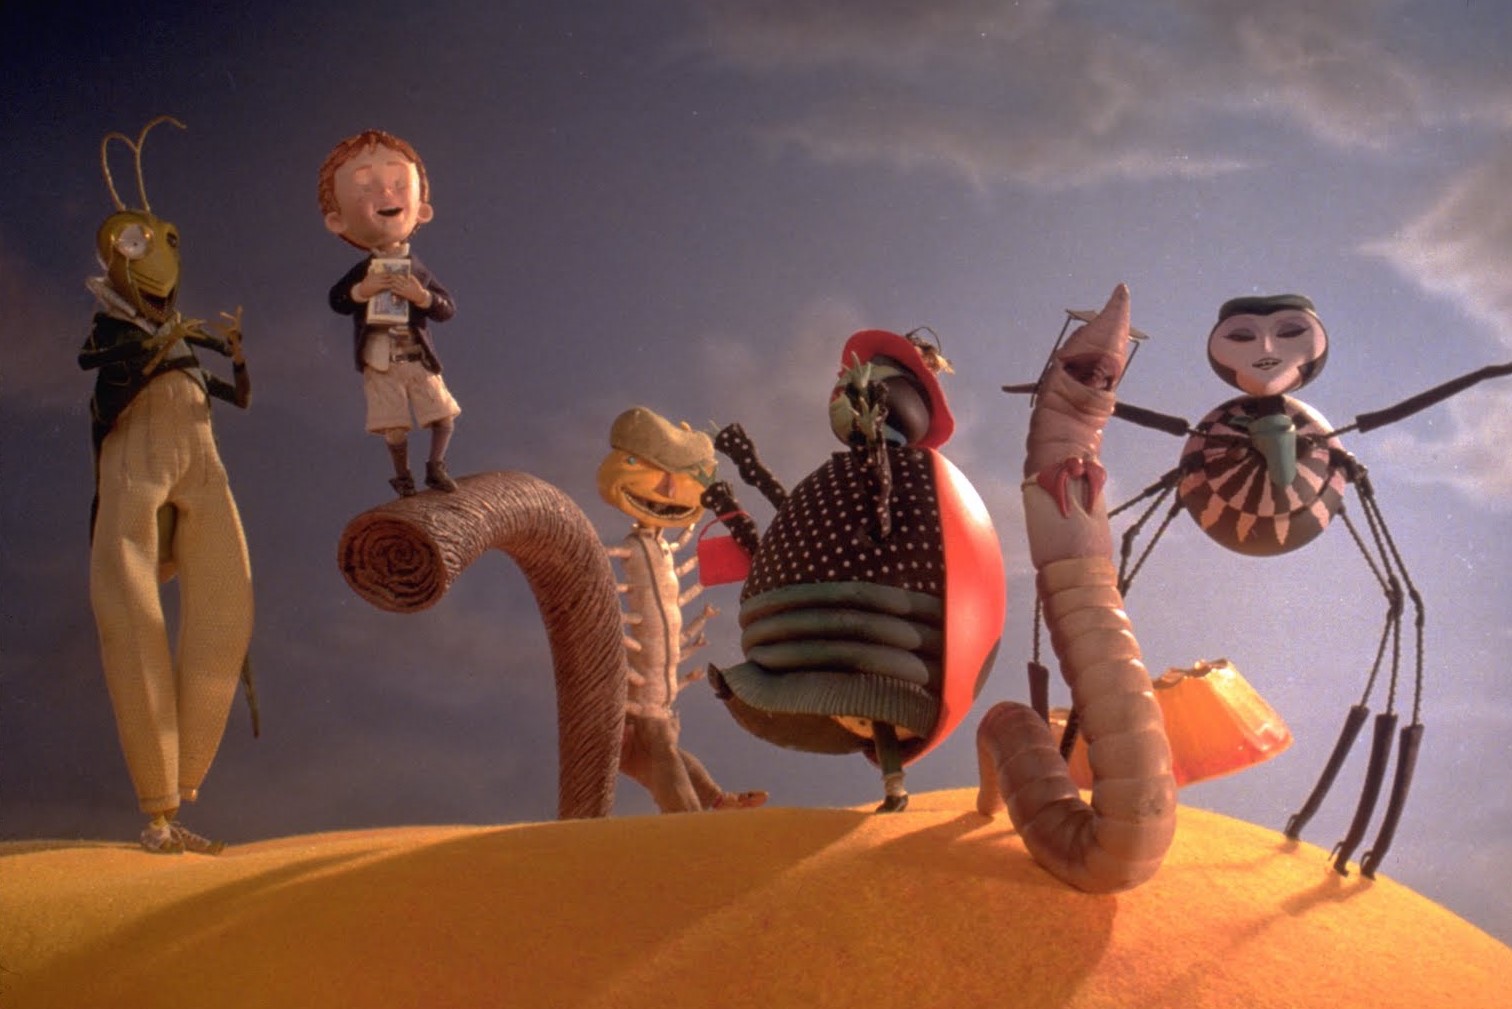 James and the bugs from James and the Giant Peach